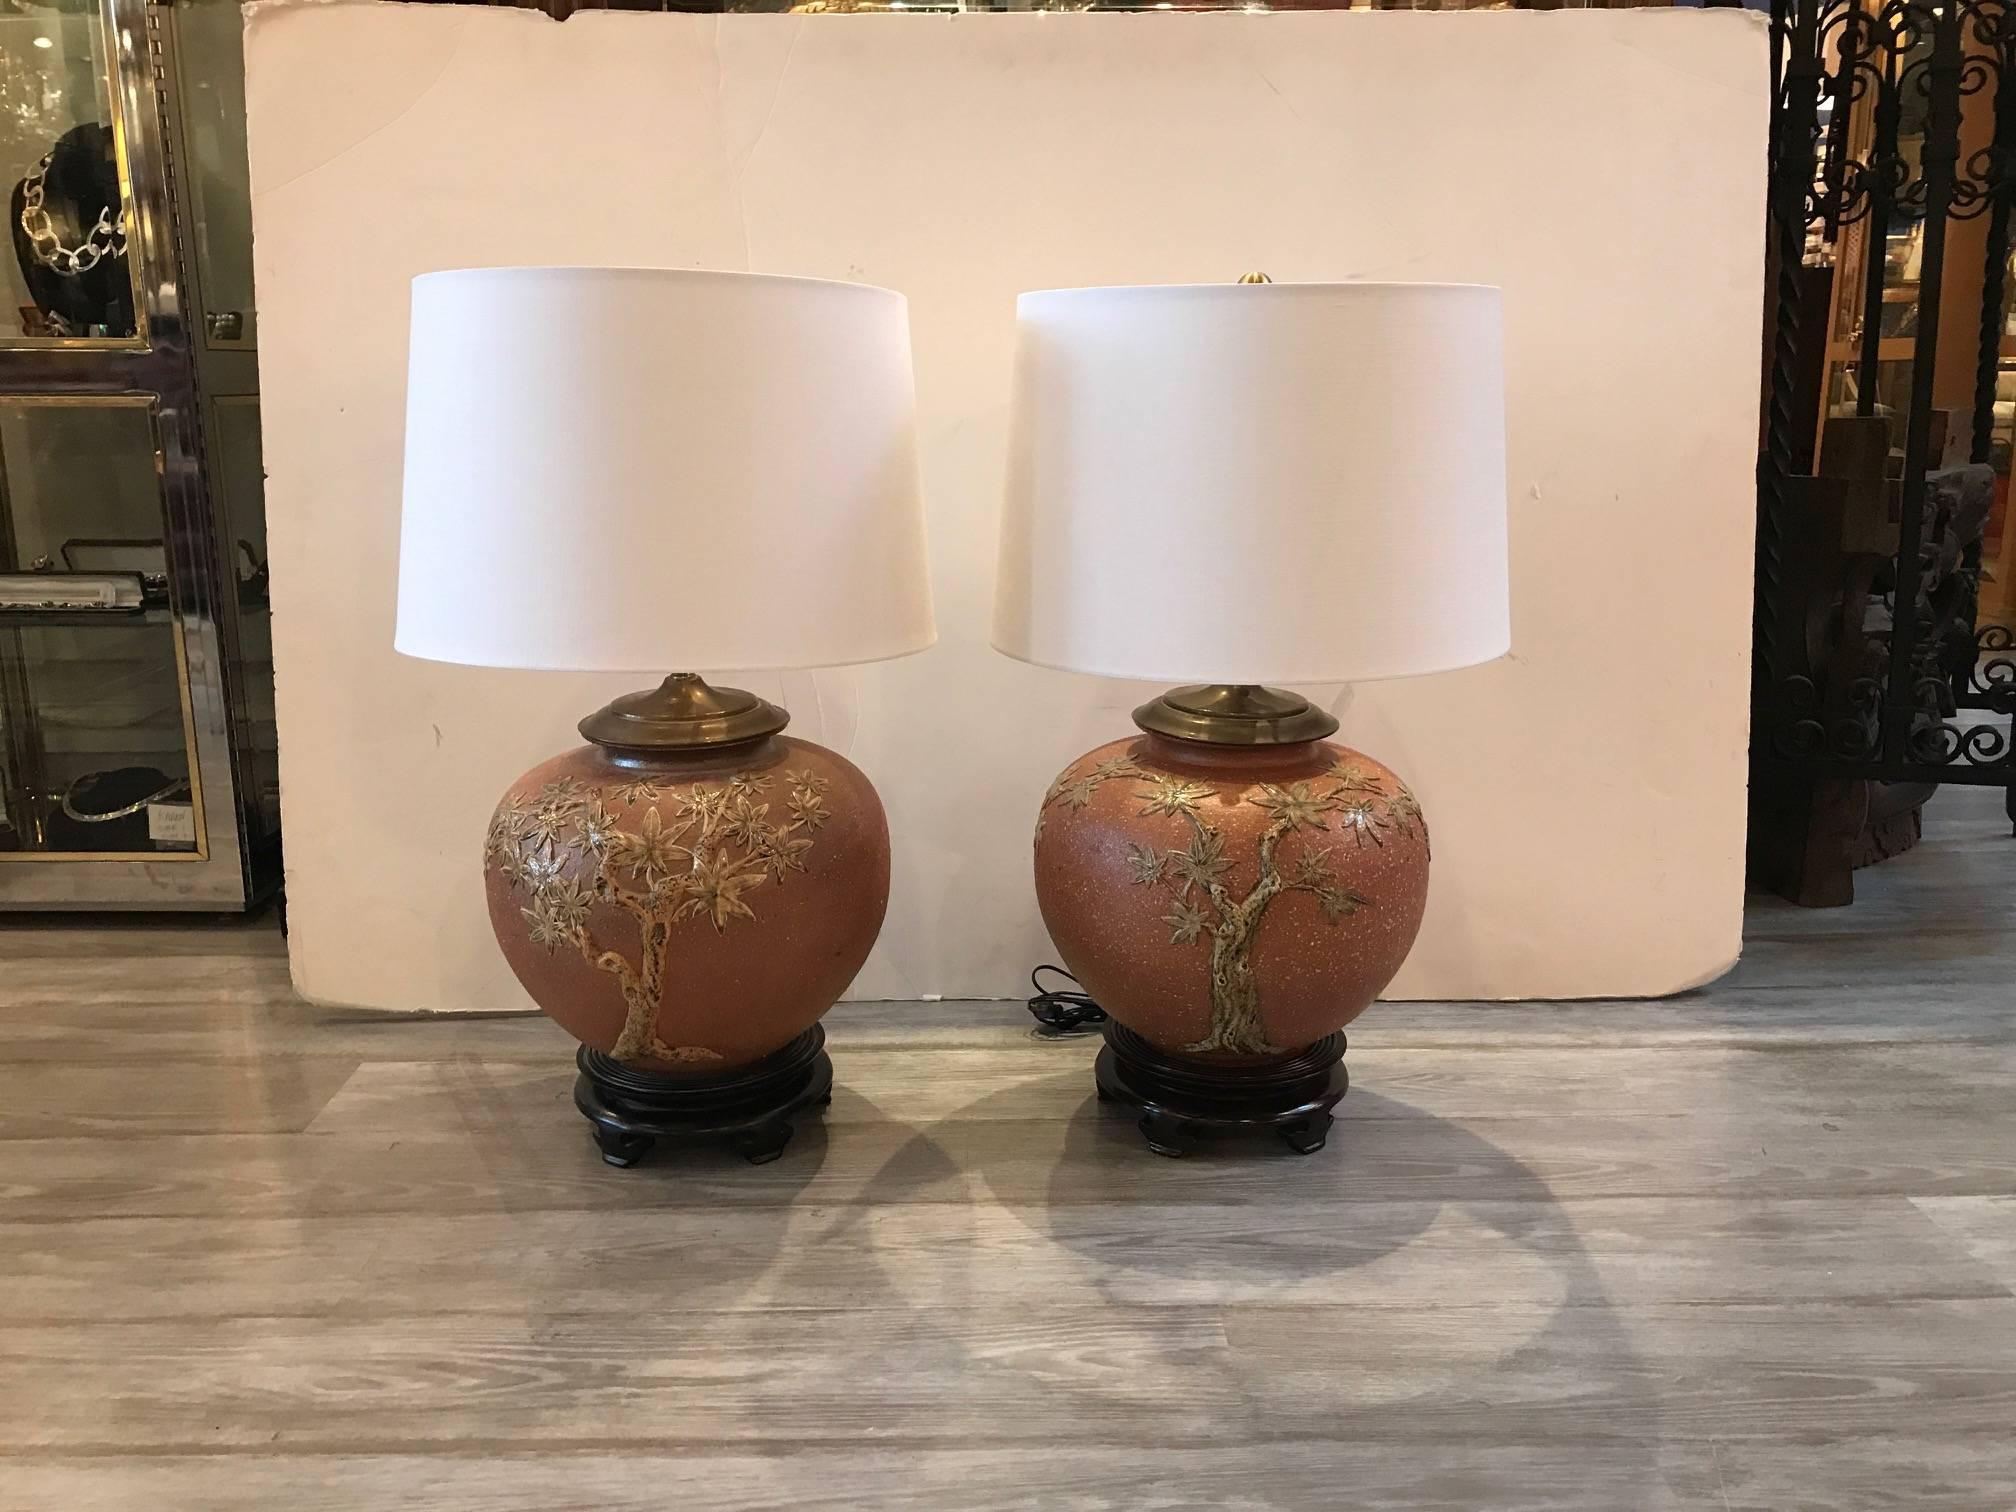 A pair of early 20th century hand thrown stoneware pots, circa 1910. The pots, with a high relief decoration of branches and leaves with a glazed finish. Each one is made and decorated. The pots have been lamped aver 50 years ago and are shown with